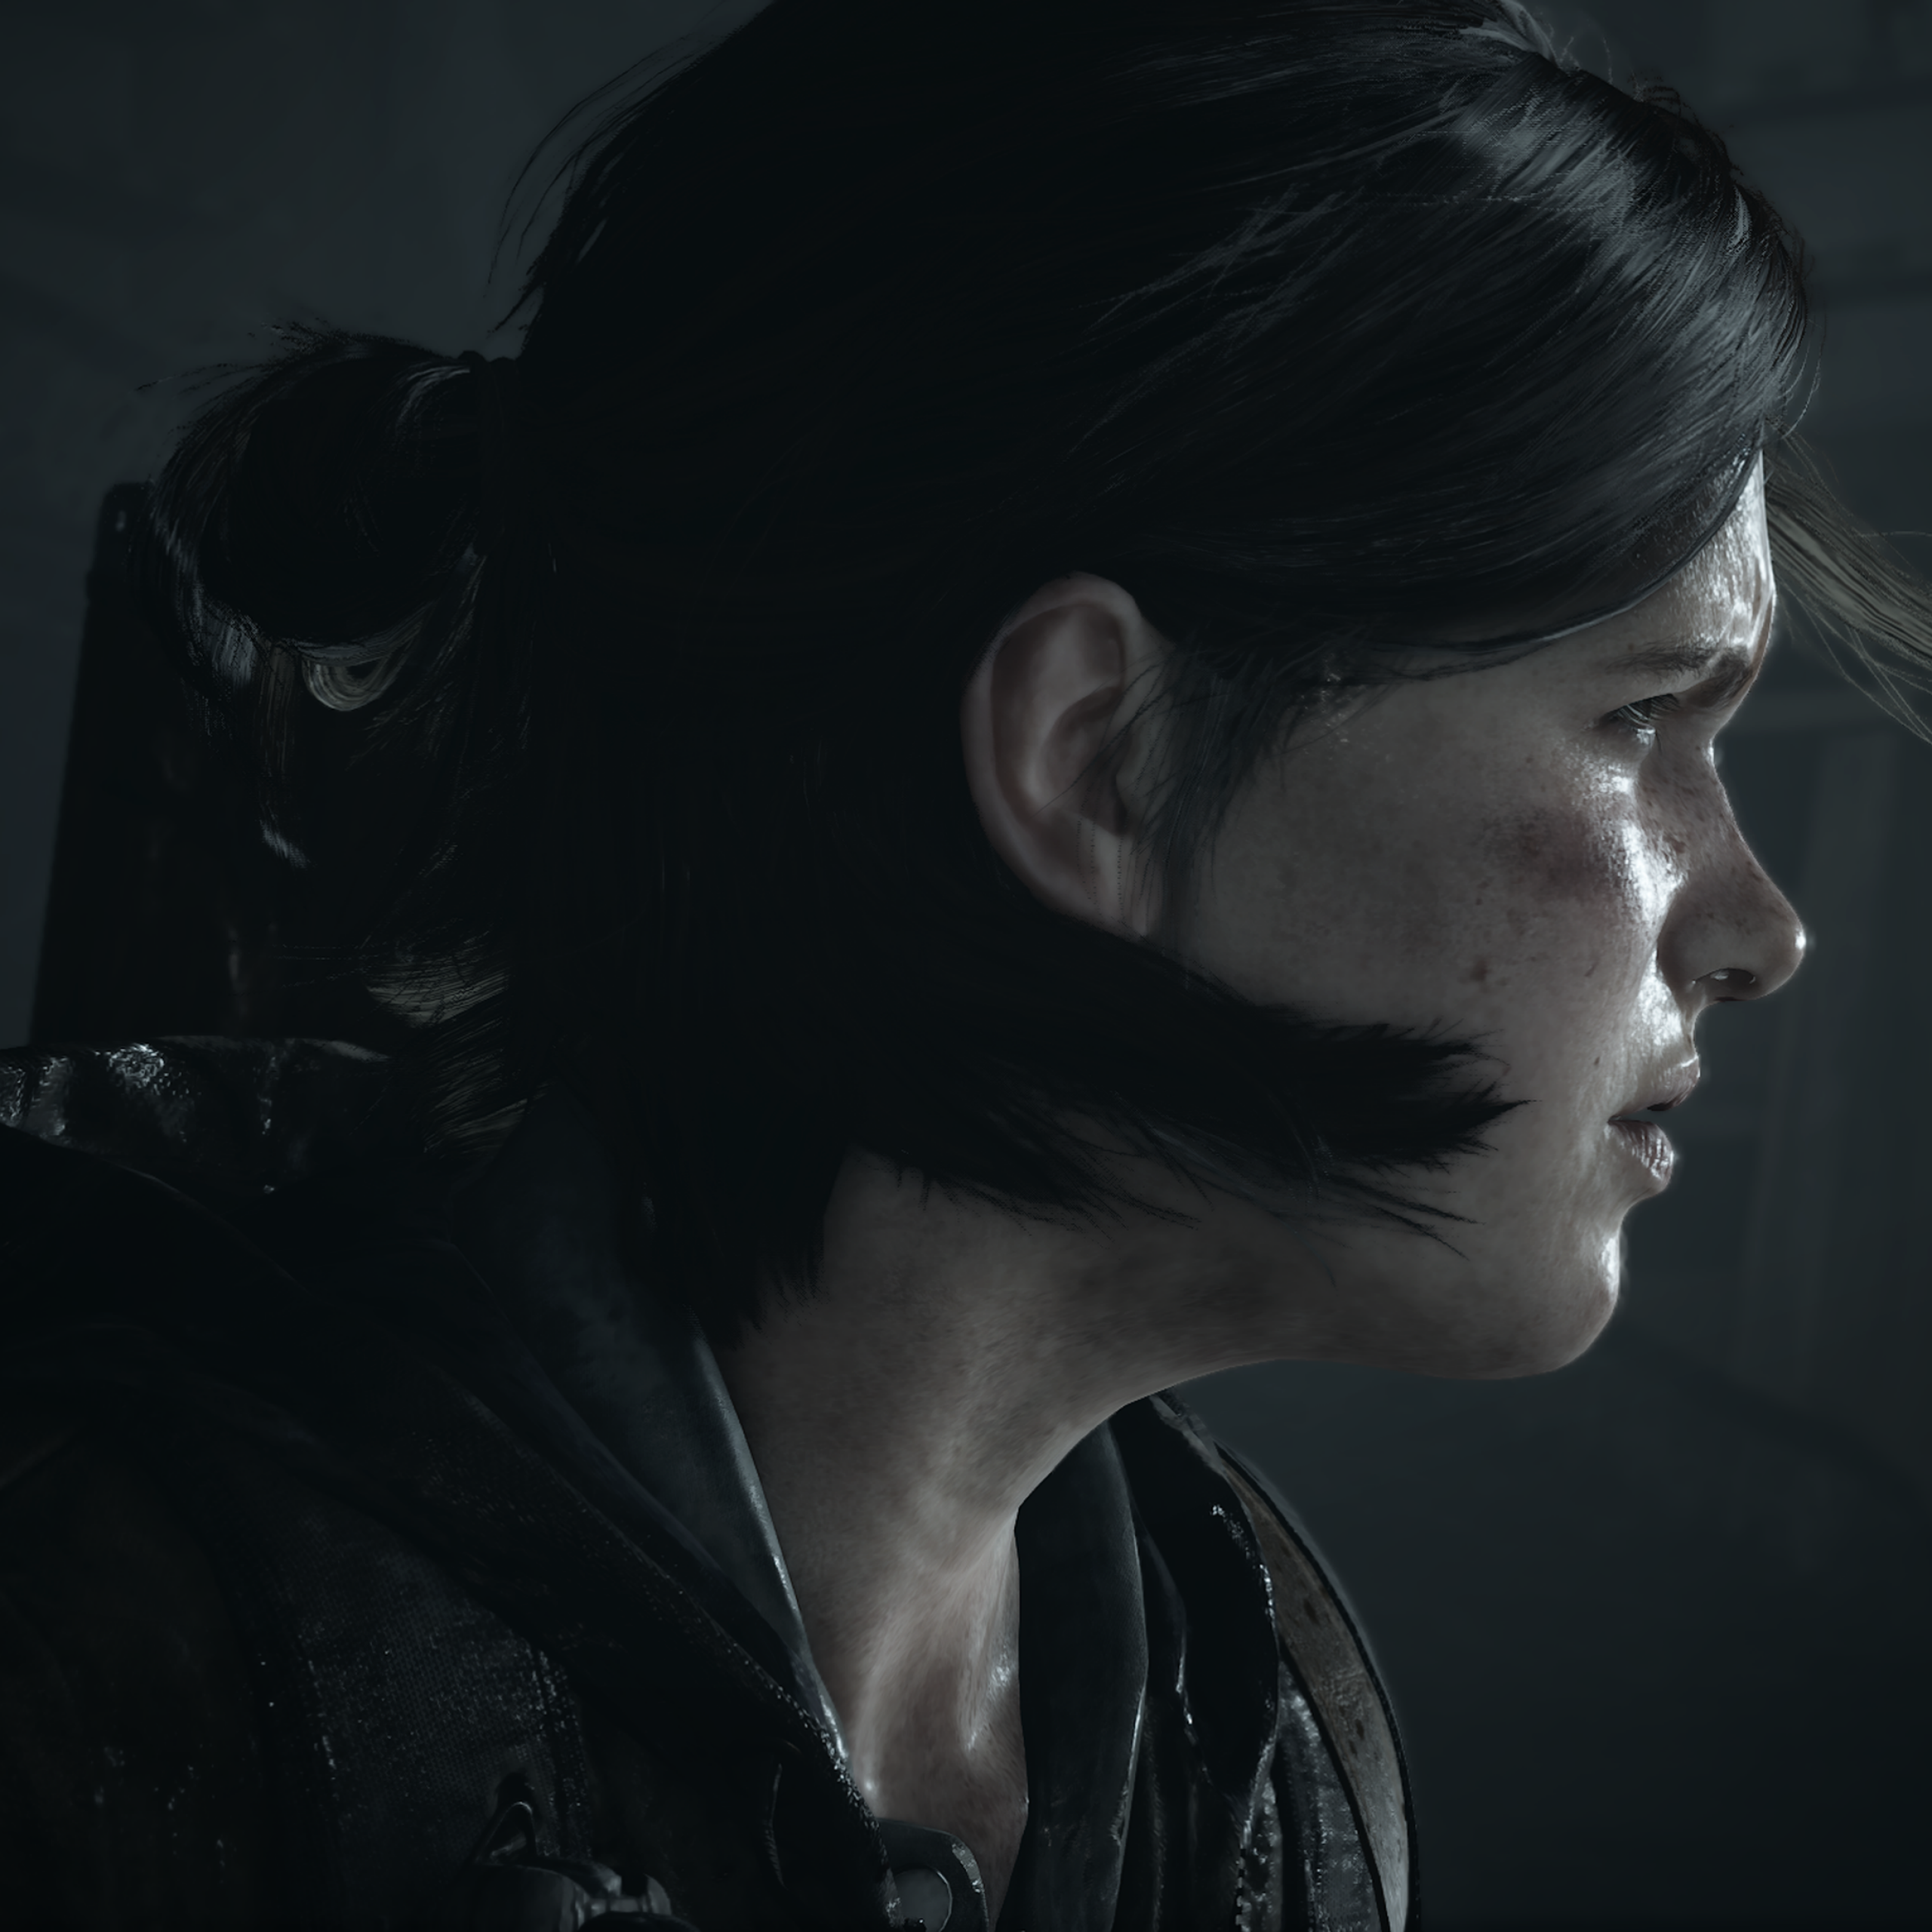 HD wallpaper video games The Last of Us 2 Ellie Williams ingame   Wallpaper Flare